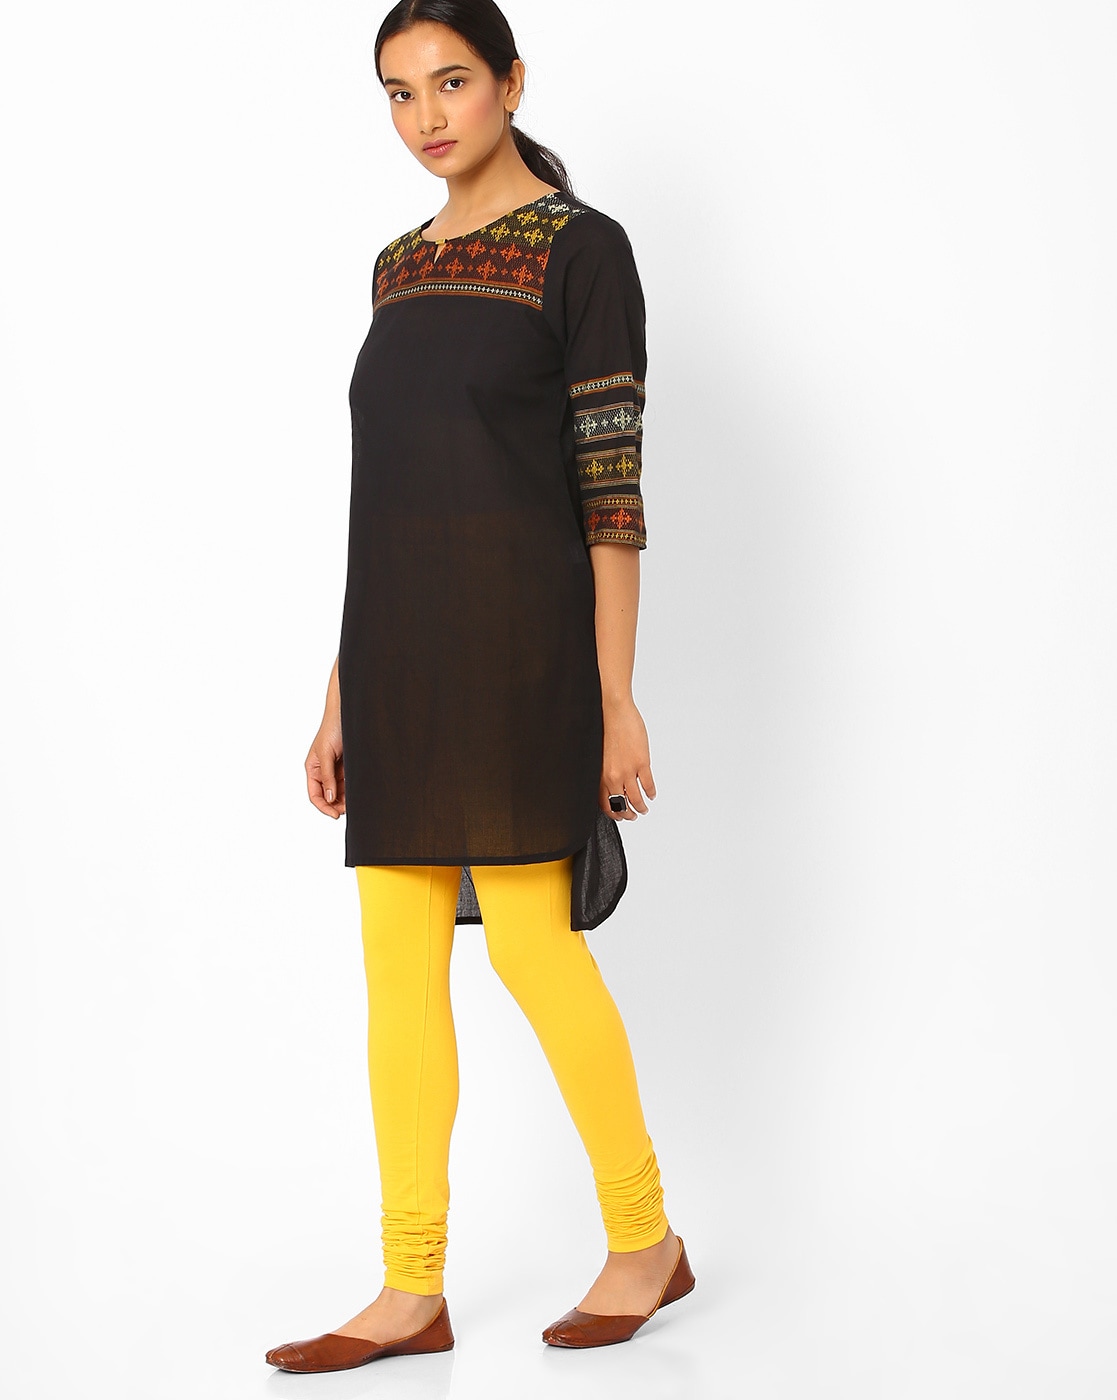 Buy Dollar Missy Rich Gold Color Churidar Legging Online at Low Prices in  India - Paytmmall.com